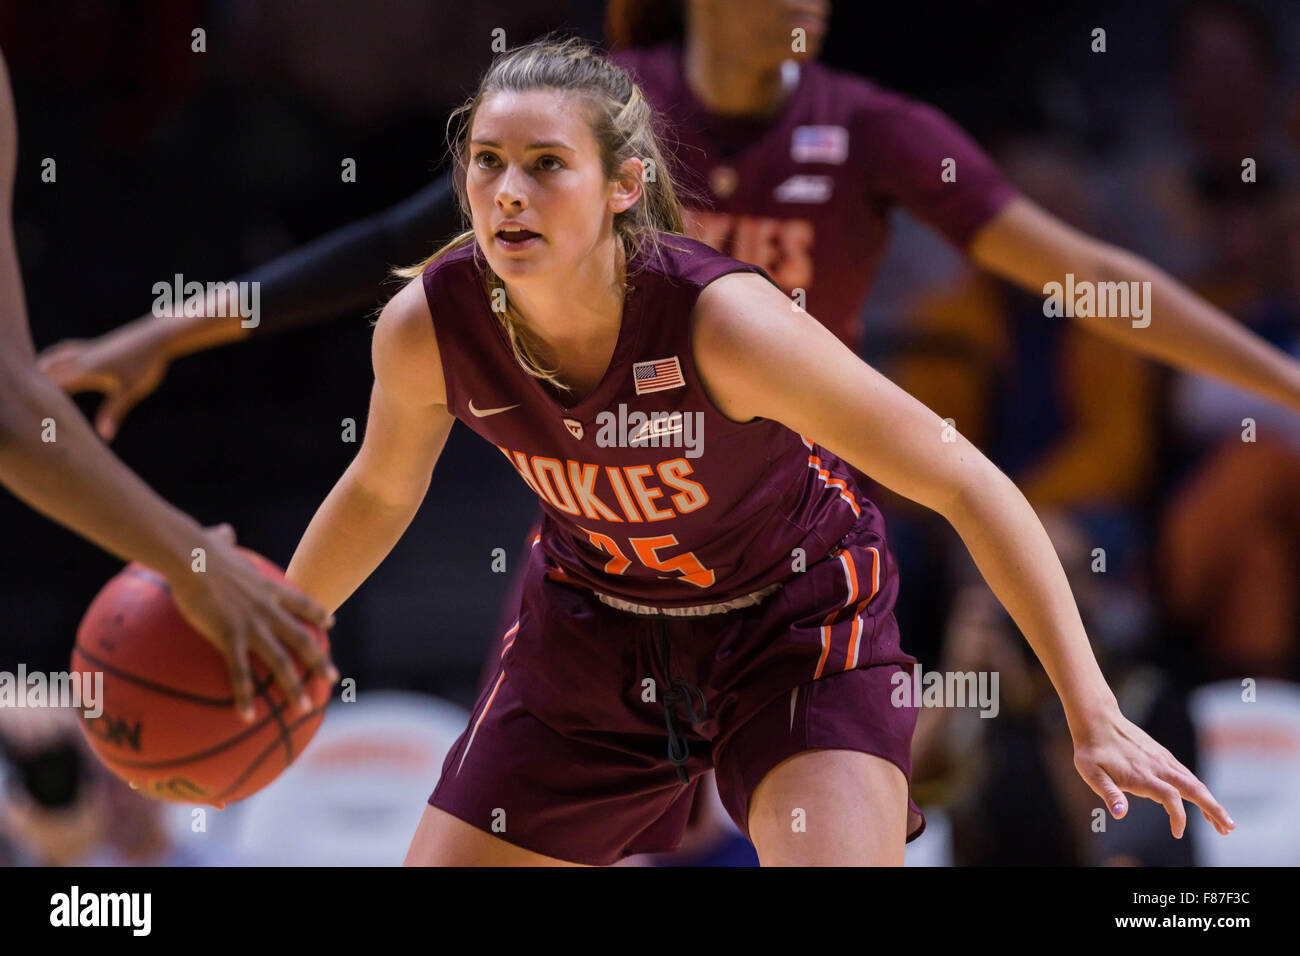 December 6, 2015: Samantha Hill #25 of the Virginia Tech Hokies defends during the NCAA basketball game between the University of Tennessee Lady Volunteers and the Virginia Tech Hokies at Thompson Boling Arena in Knoxville TN Tim Gangloff/CSM Stock Photo